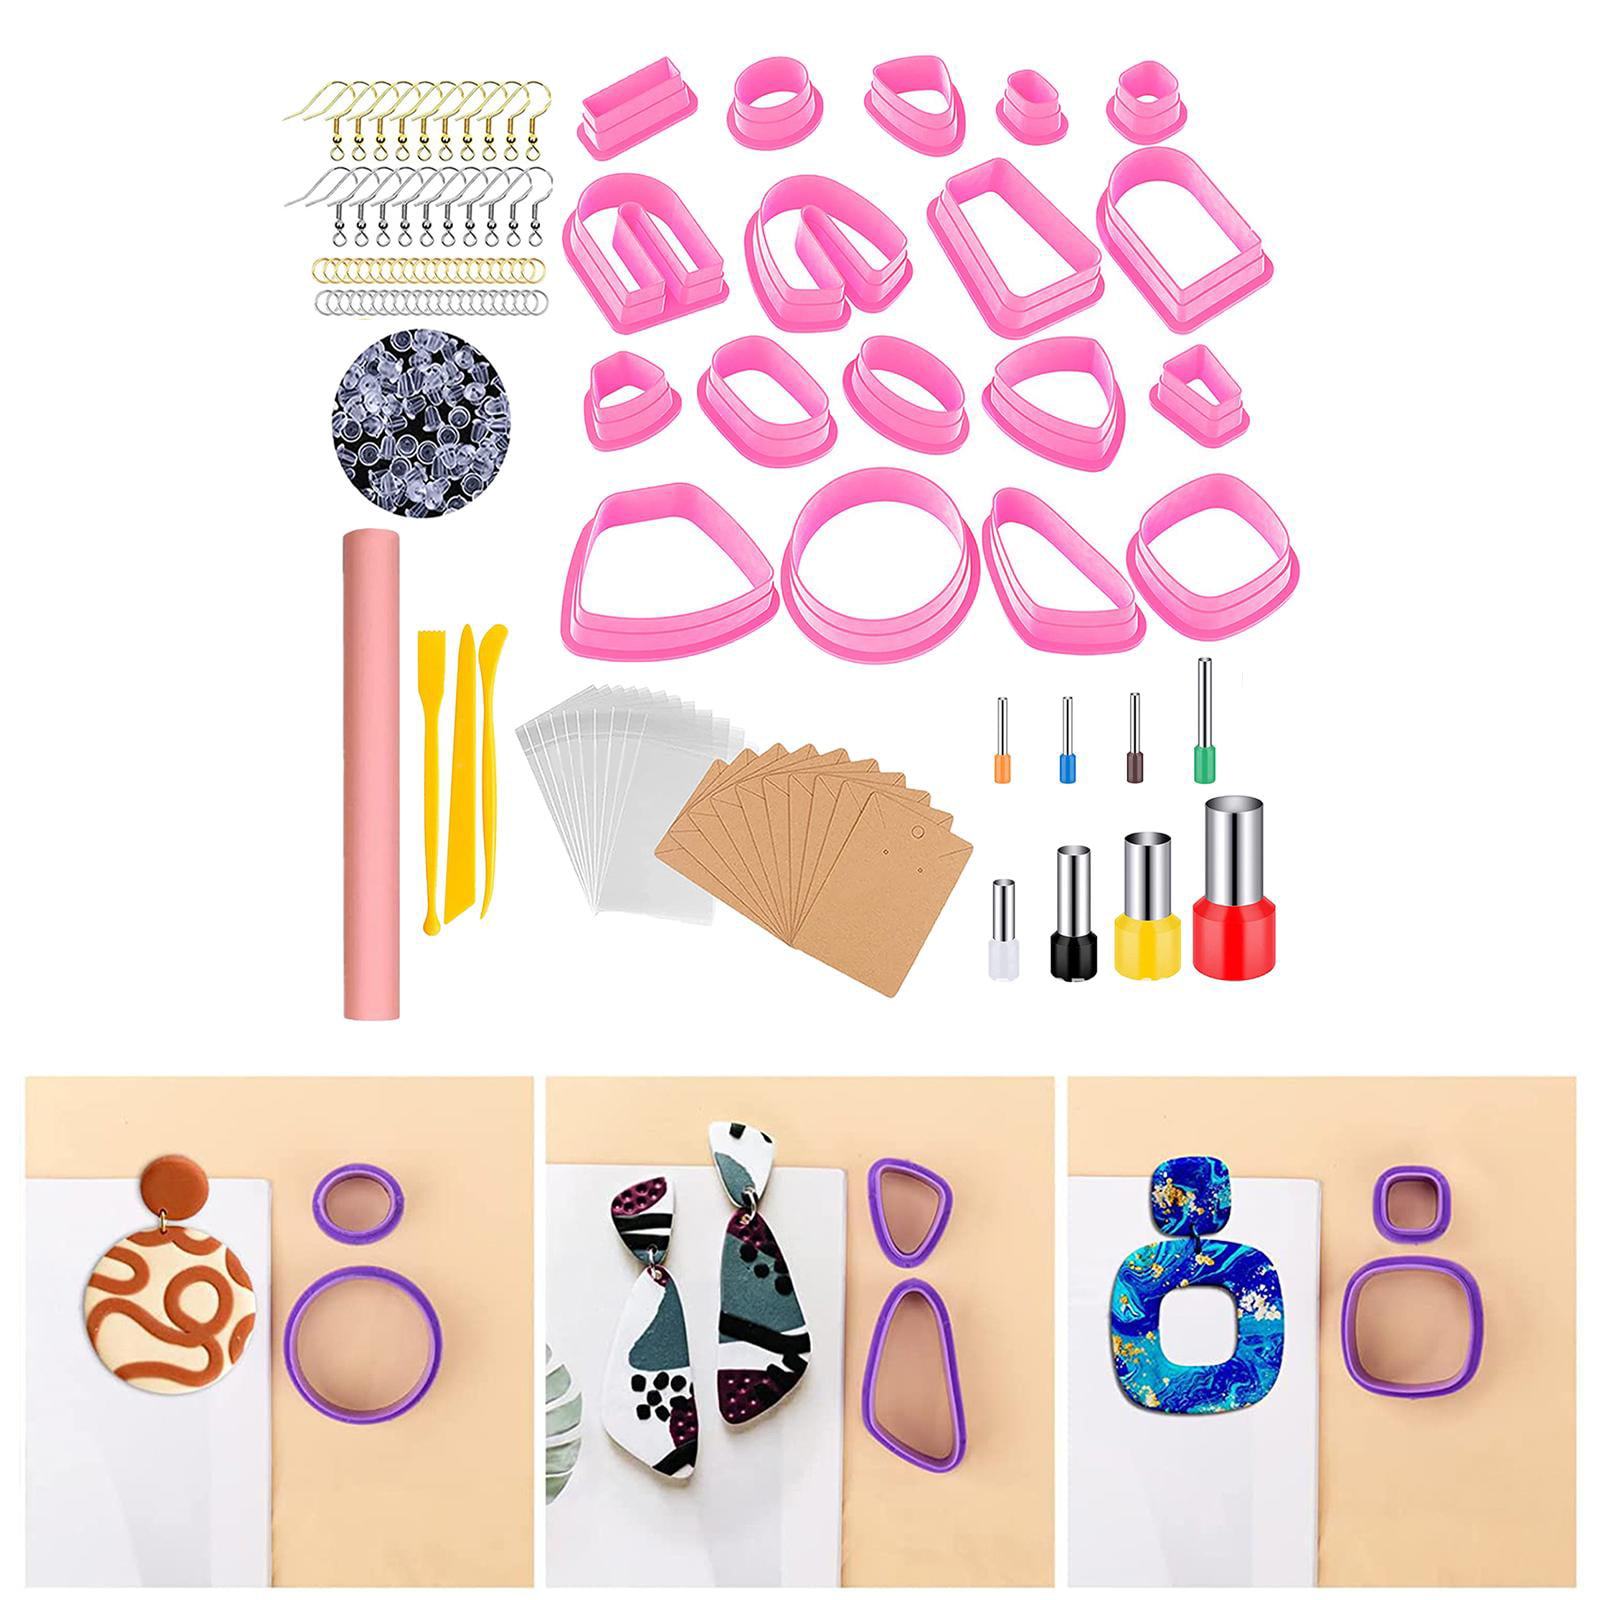  Aksucer 310Pcs Polymer Clay Earring Making Kit Include 36Colors  Clay, 22Shapes Clay Earring Cutters Molds, Stencil, Jewelry Pliers, Earring  Hooks Accessories for Polymer Clay Earrings Making Supplies : Arts, Crafts 